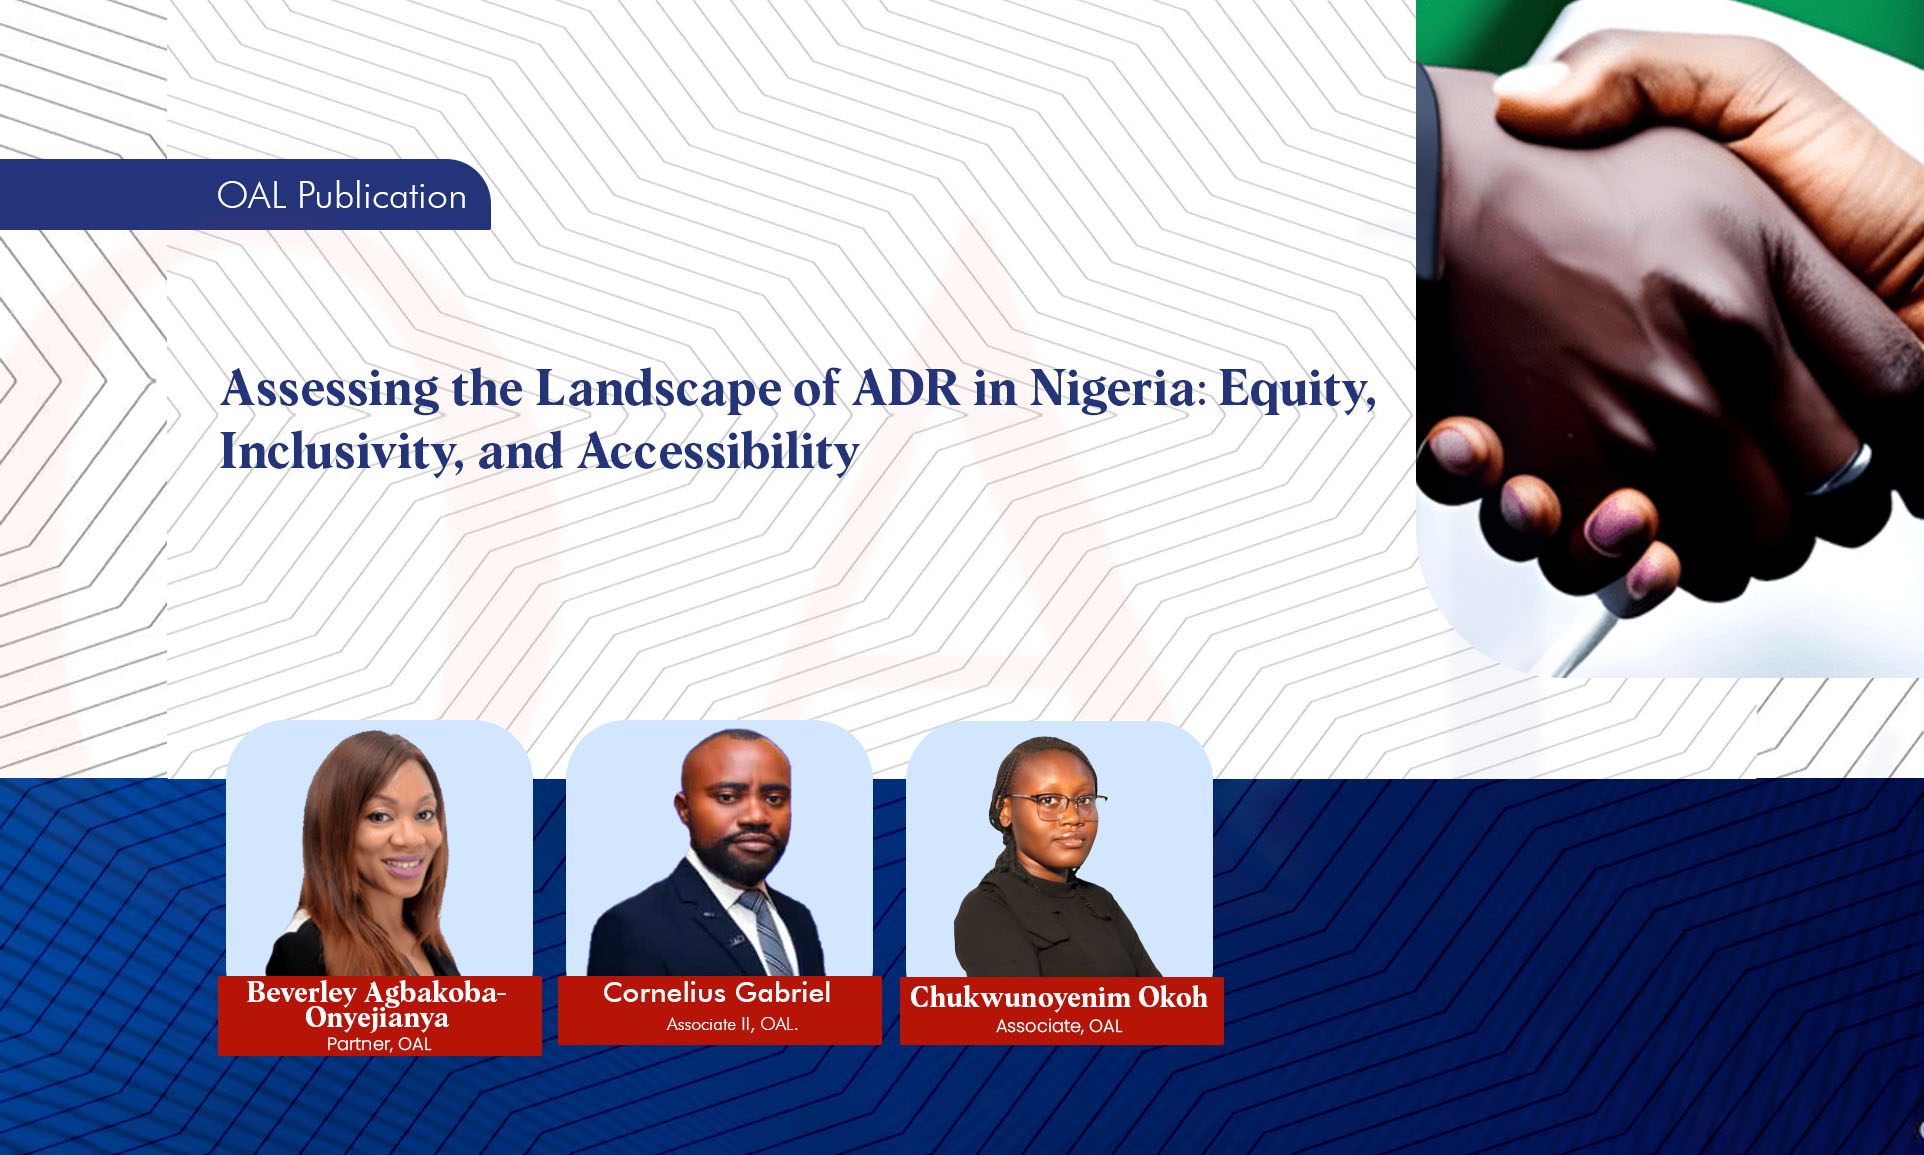 Assessing the Landscape of ADR in Nigeria - Equity Inclusivity and Accessibility